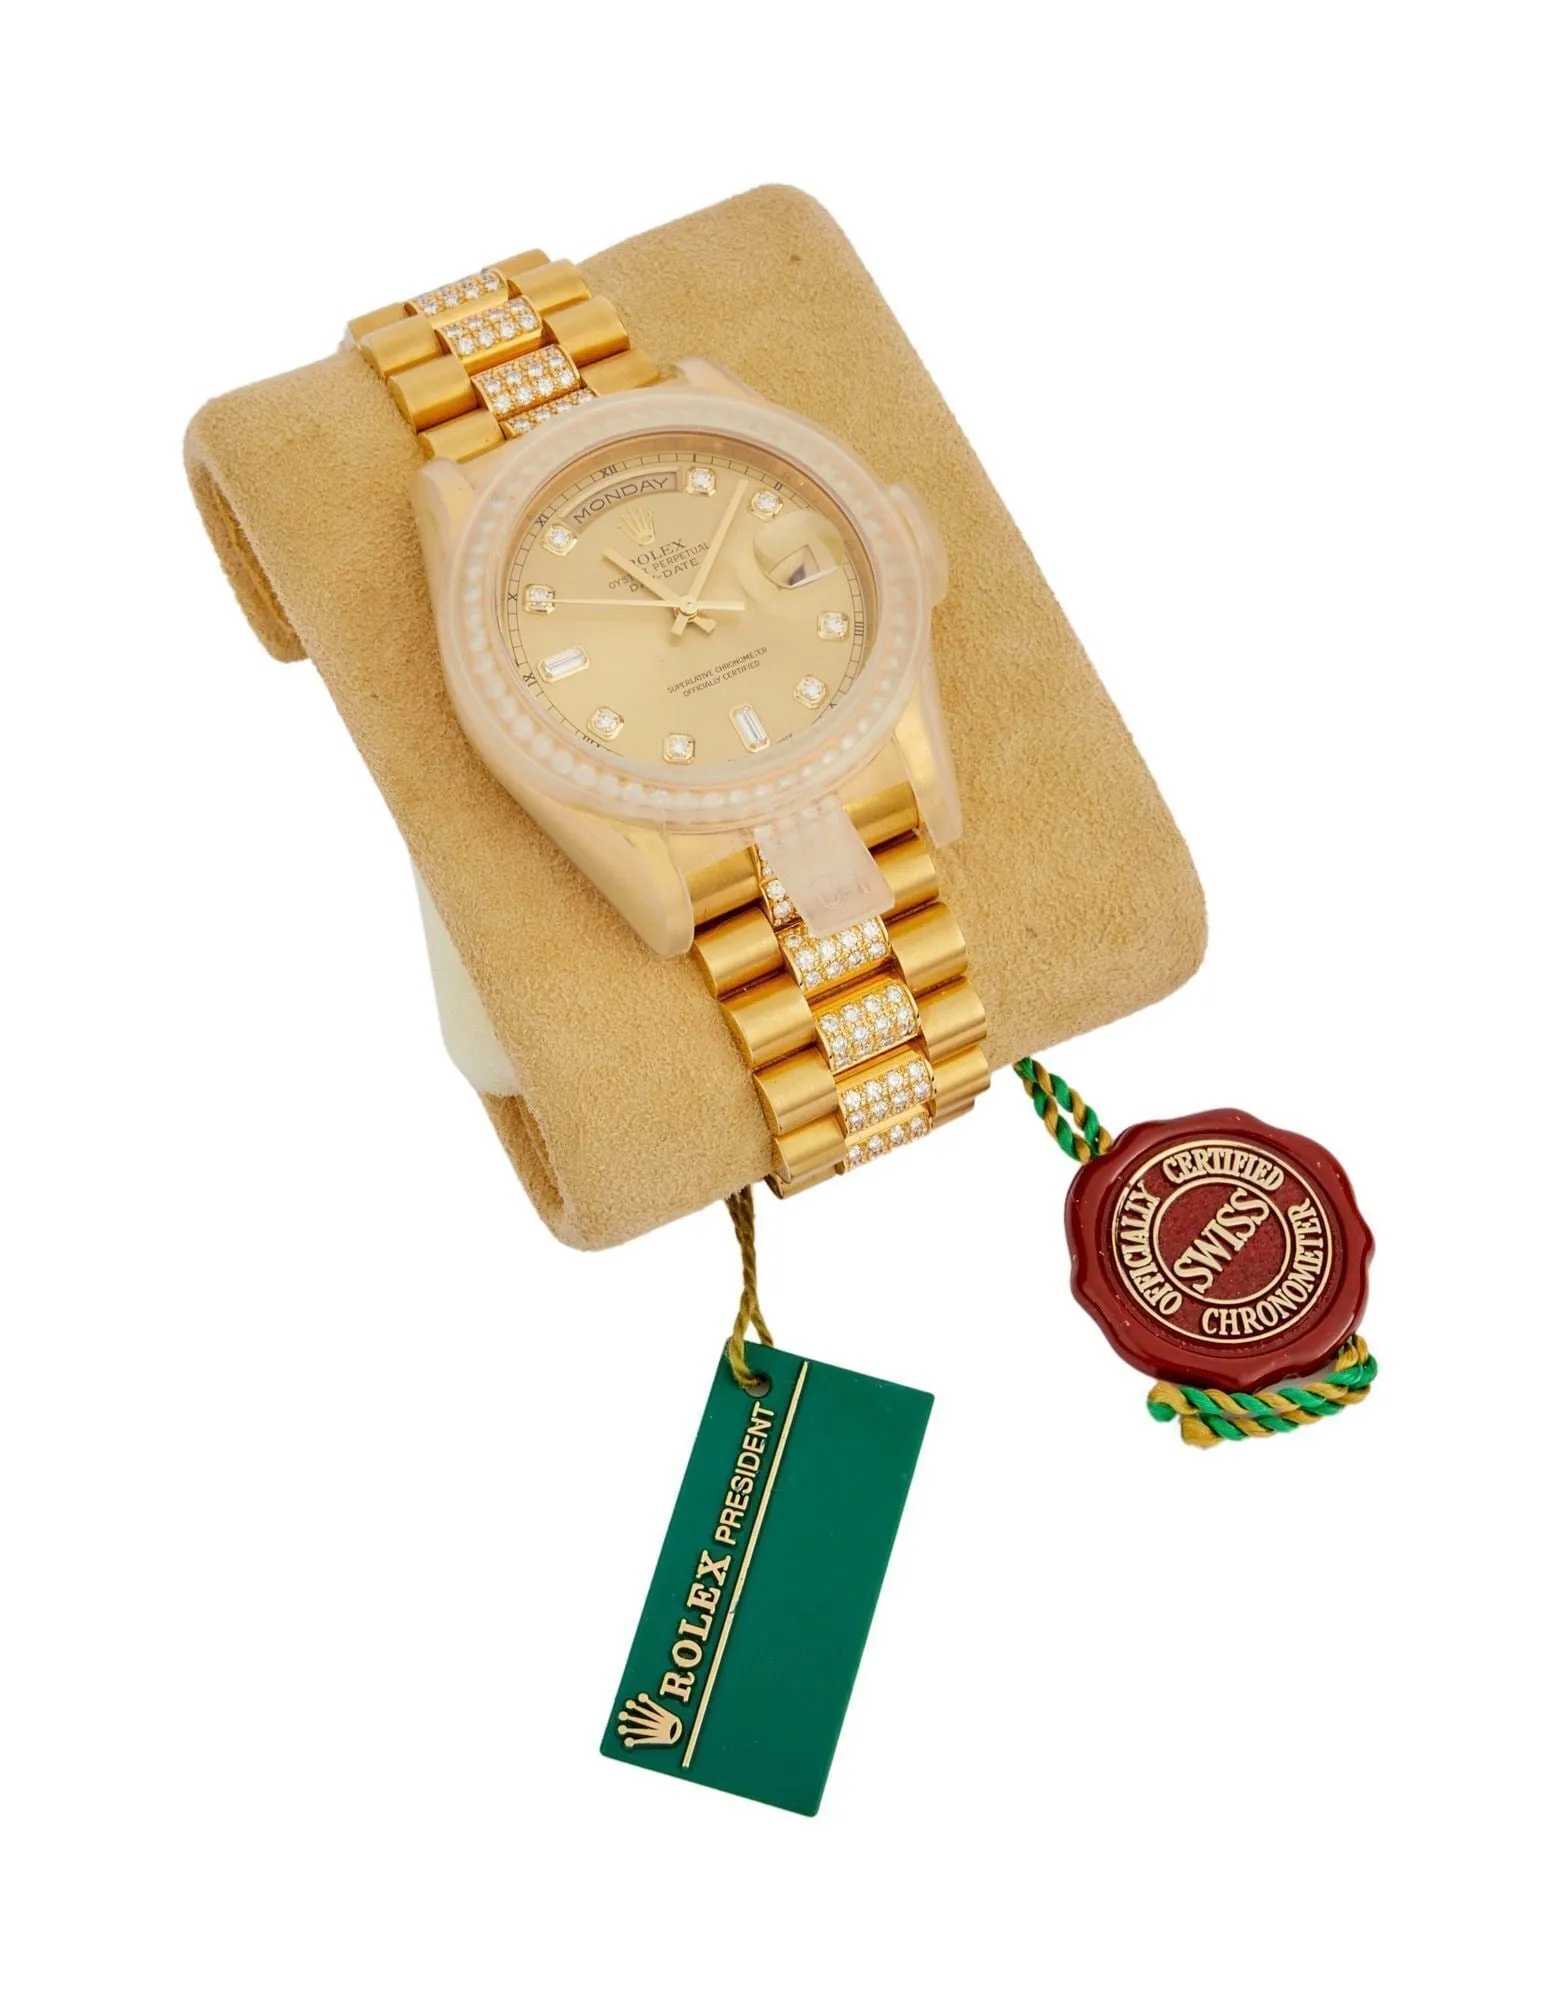 Tony Bennett's personal Rolex Day and Date watch, estimated at $25,000-$35,000 at Julien's.